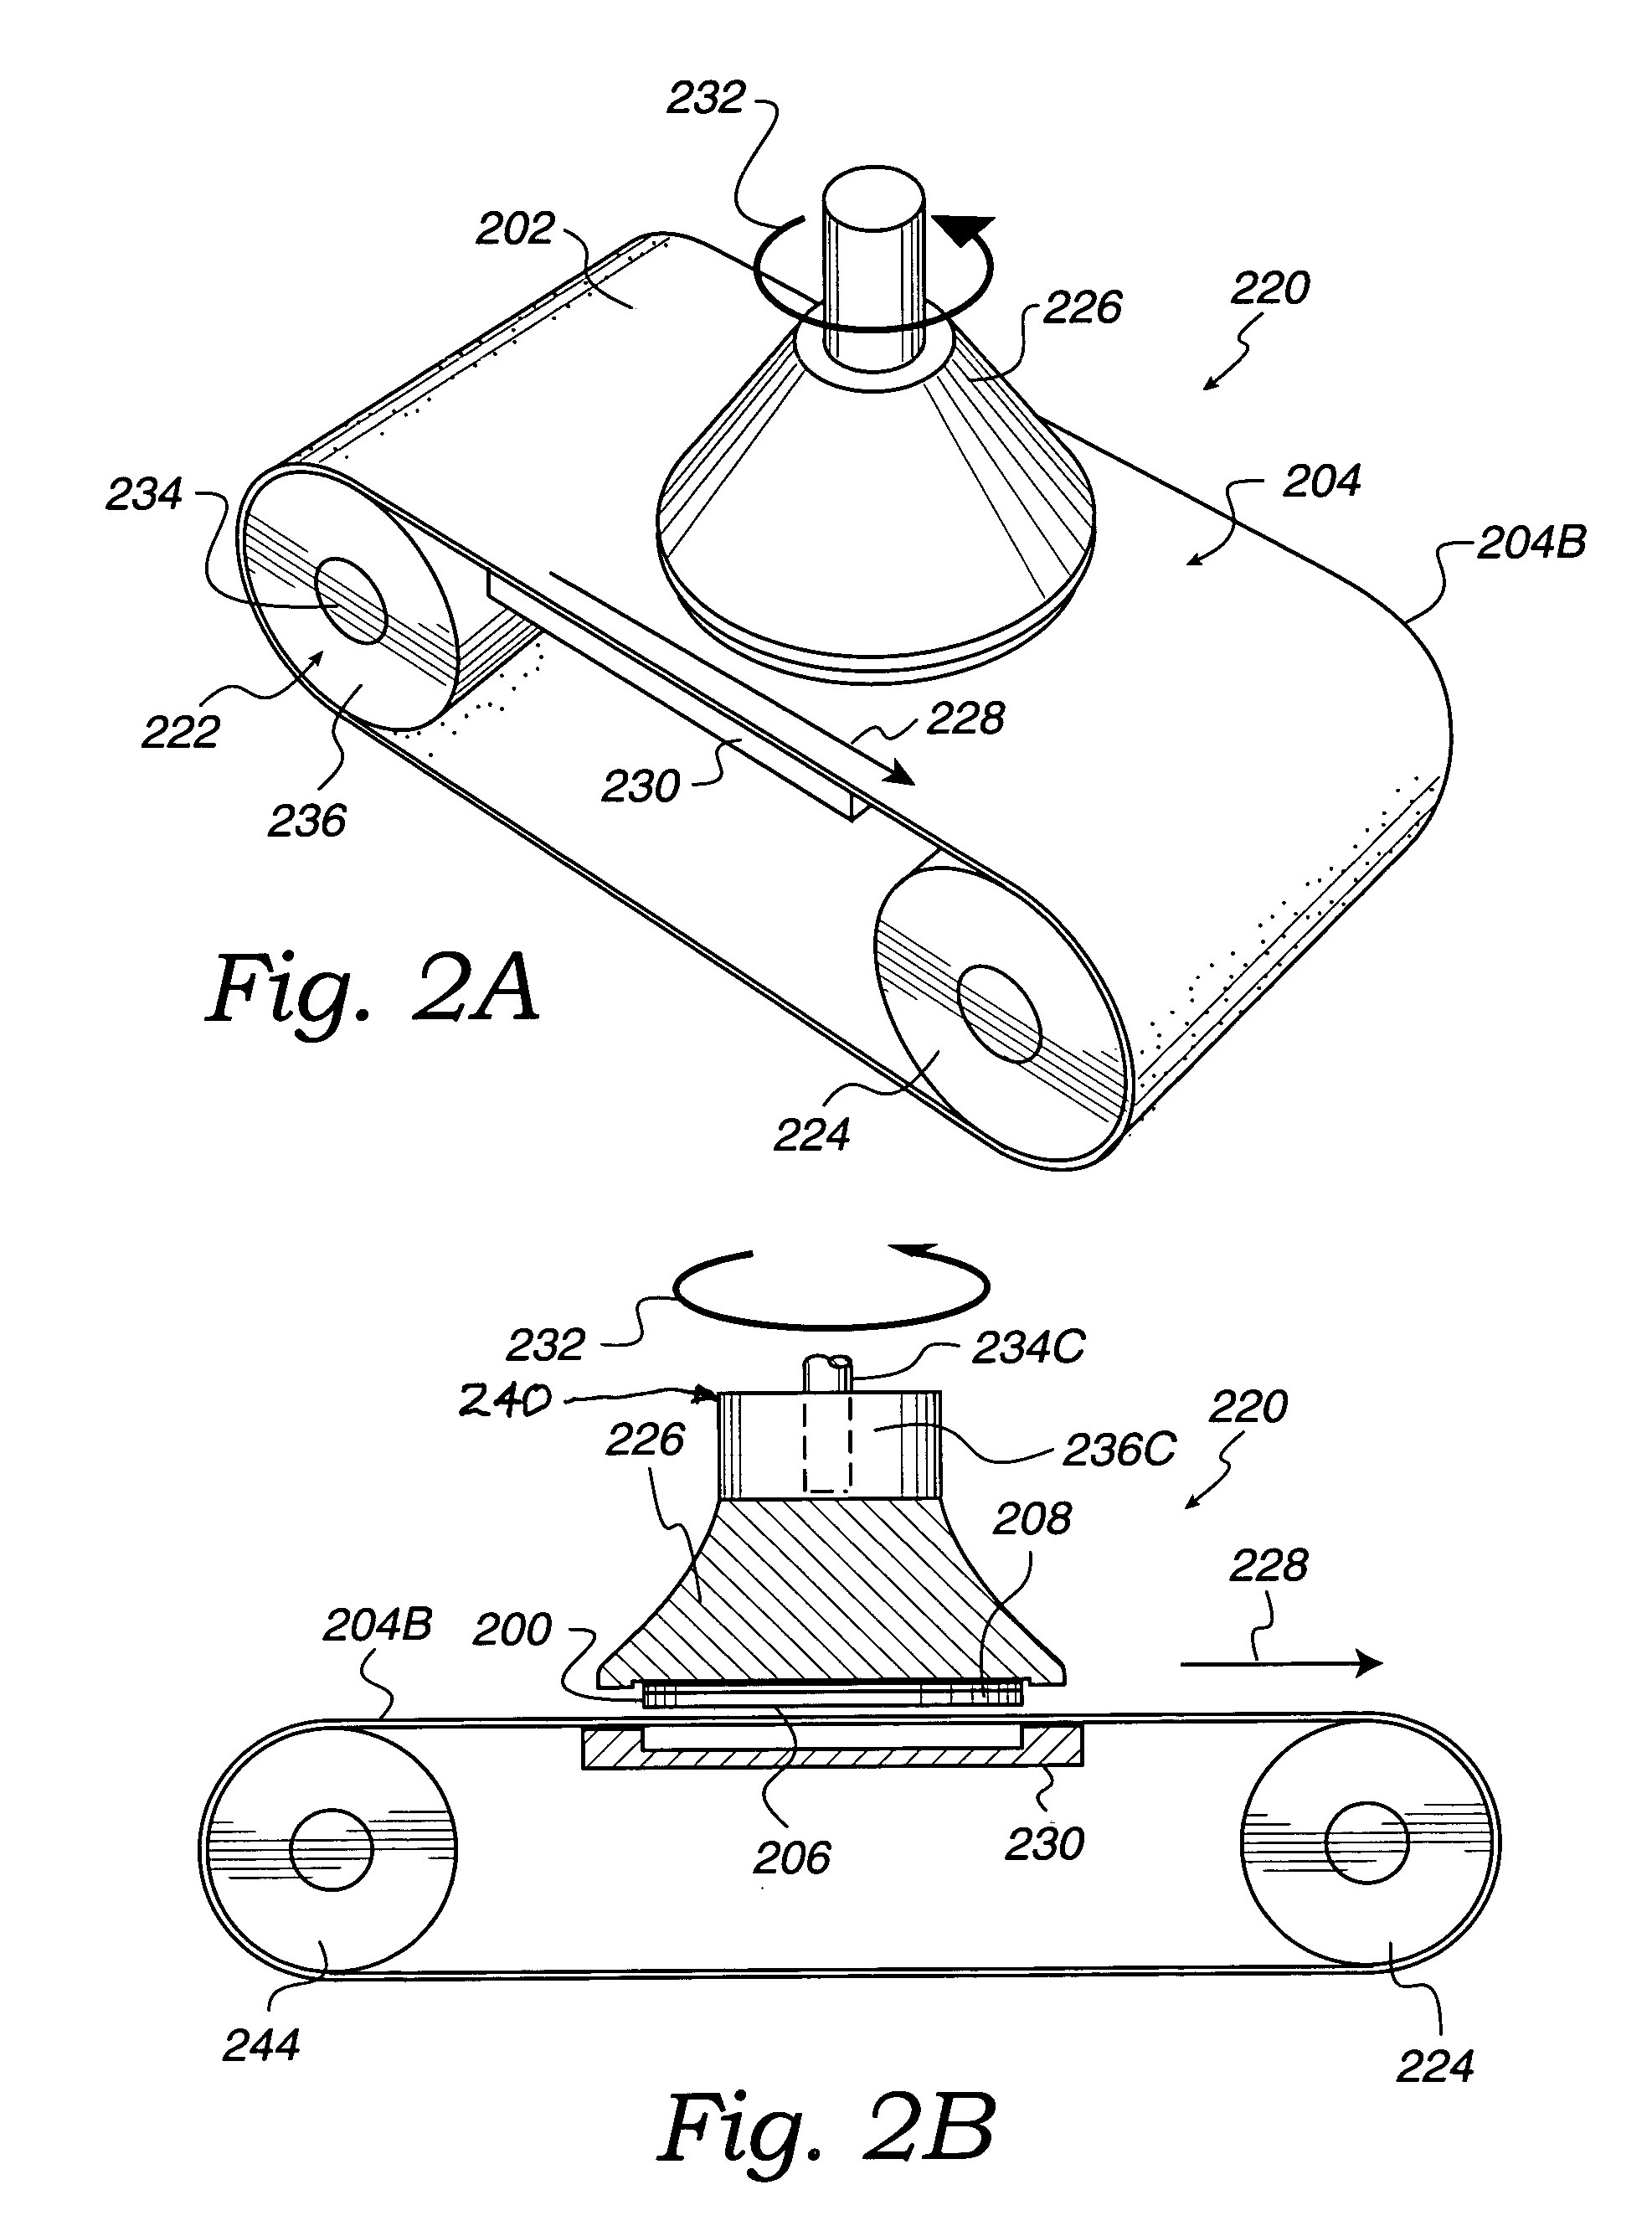 Methods of and apparatus for controlling polishing surface characteristics for chemical mechanical polishing